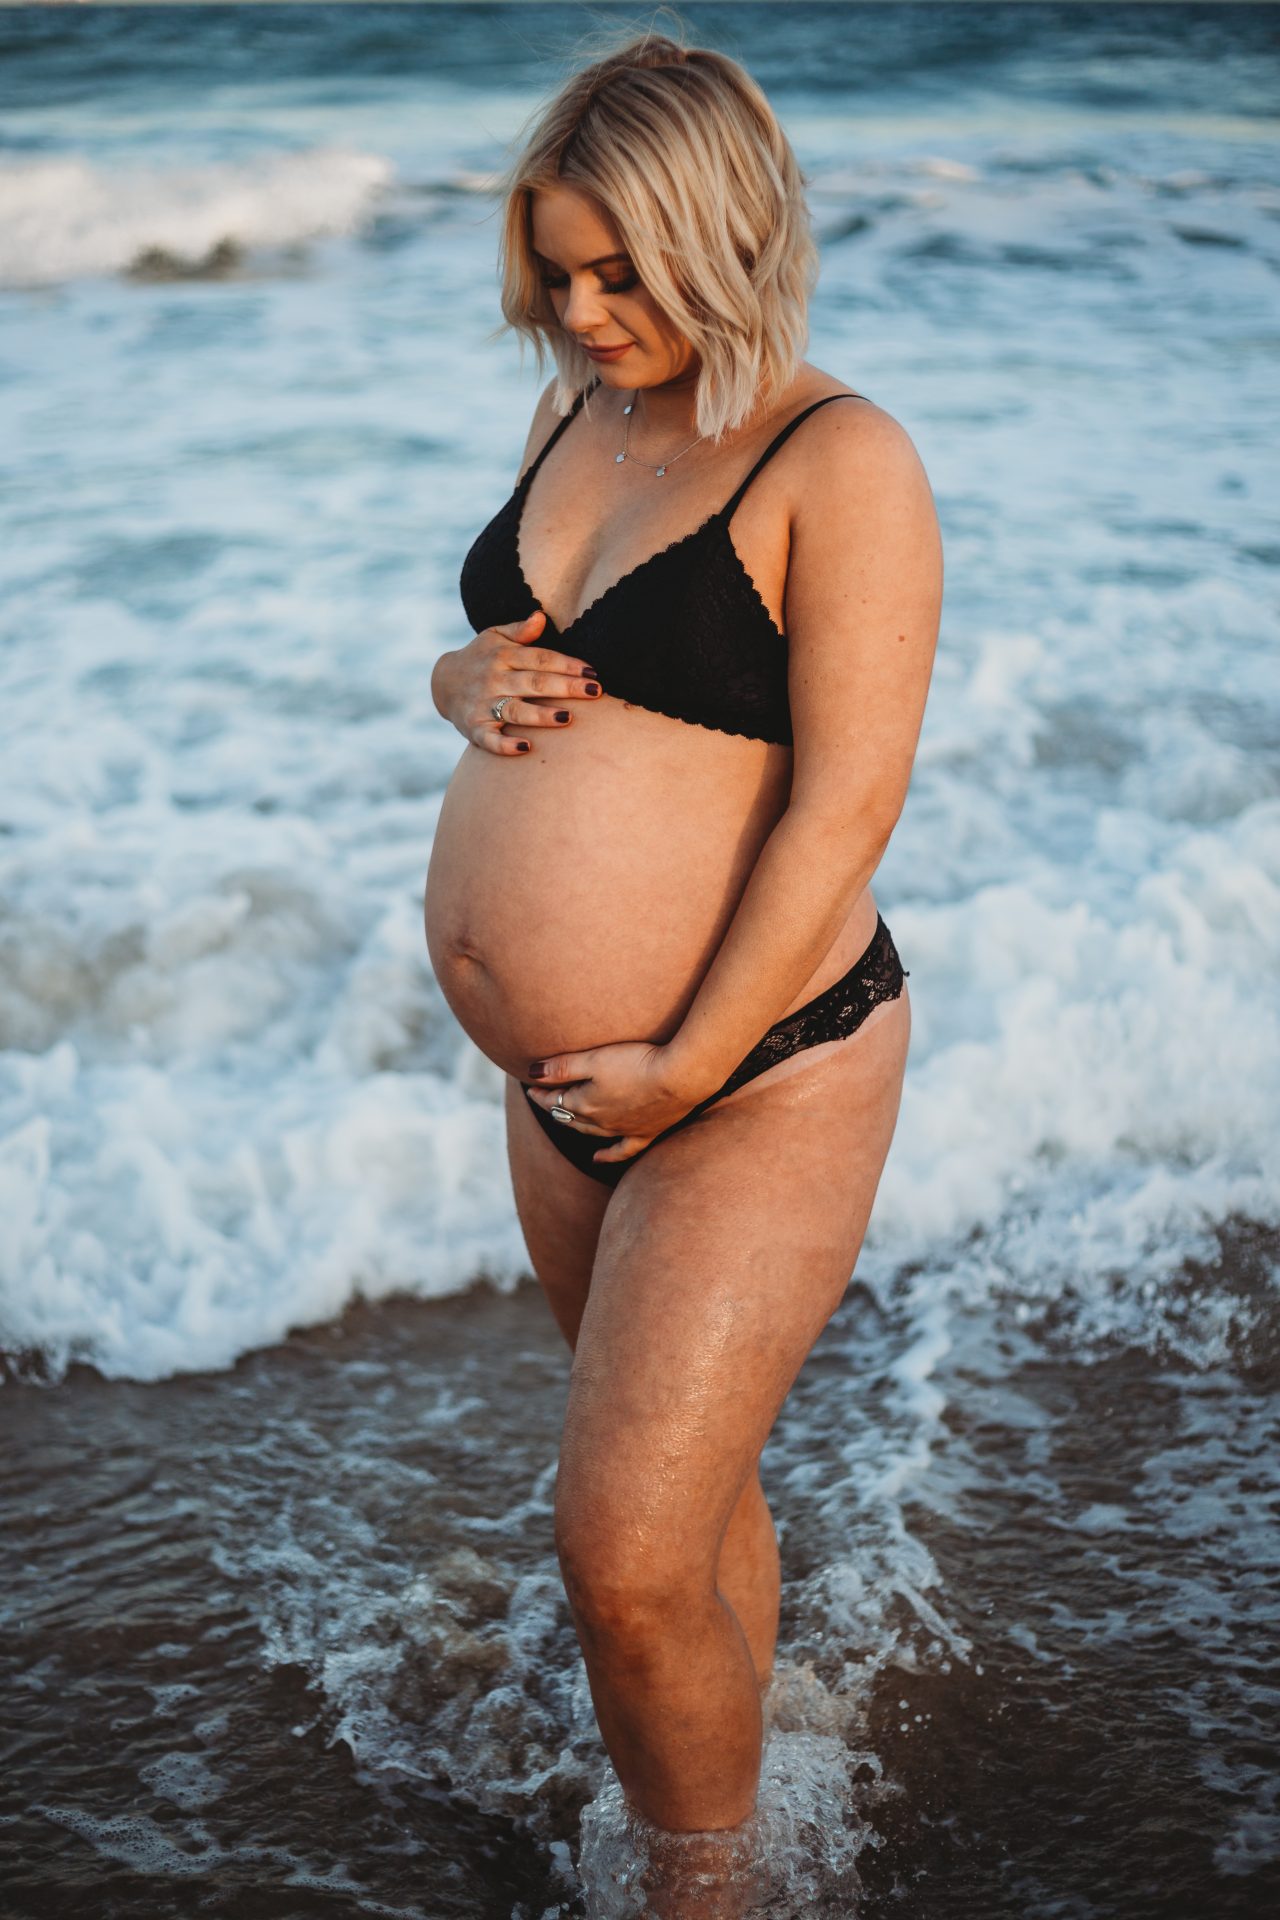 Young pregnant woman's stomach, posed in ocean at sunset, wearing black bra and underwear